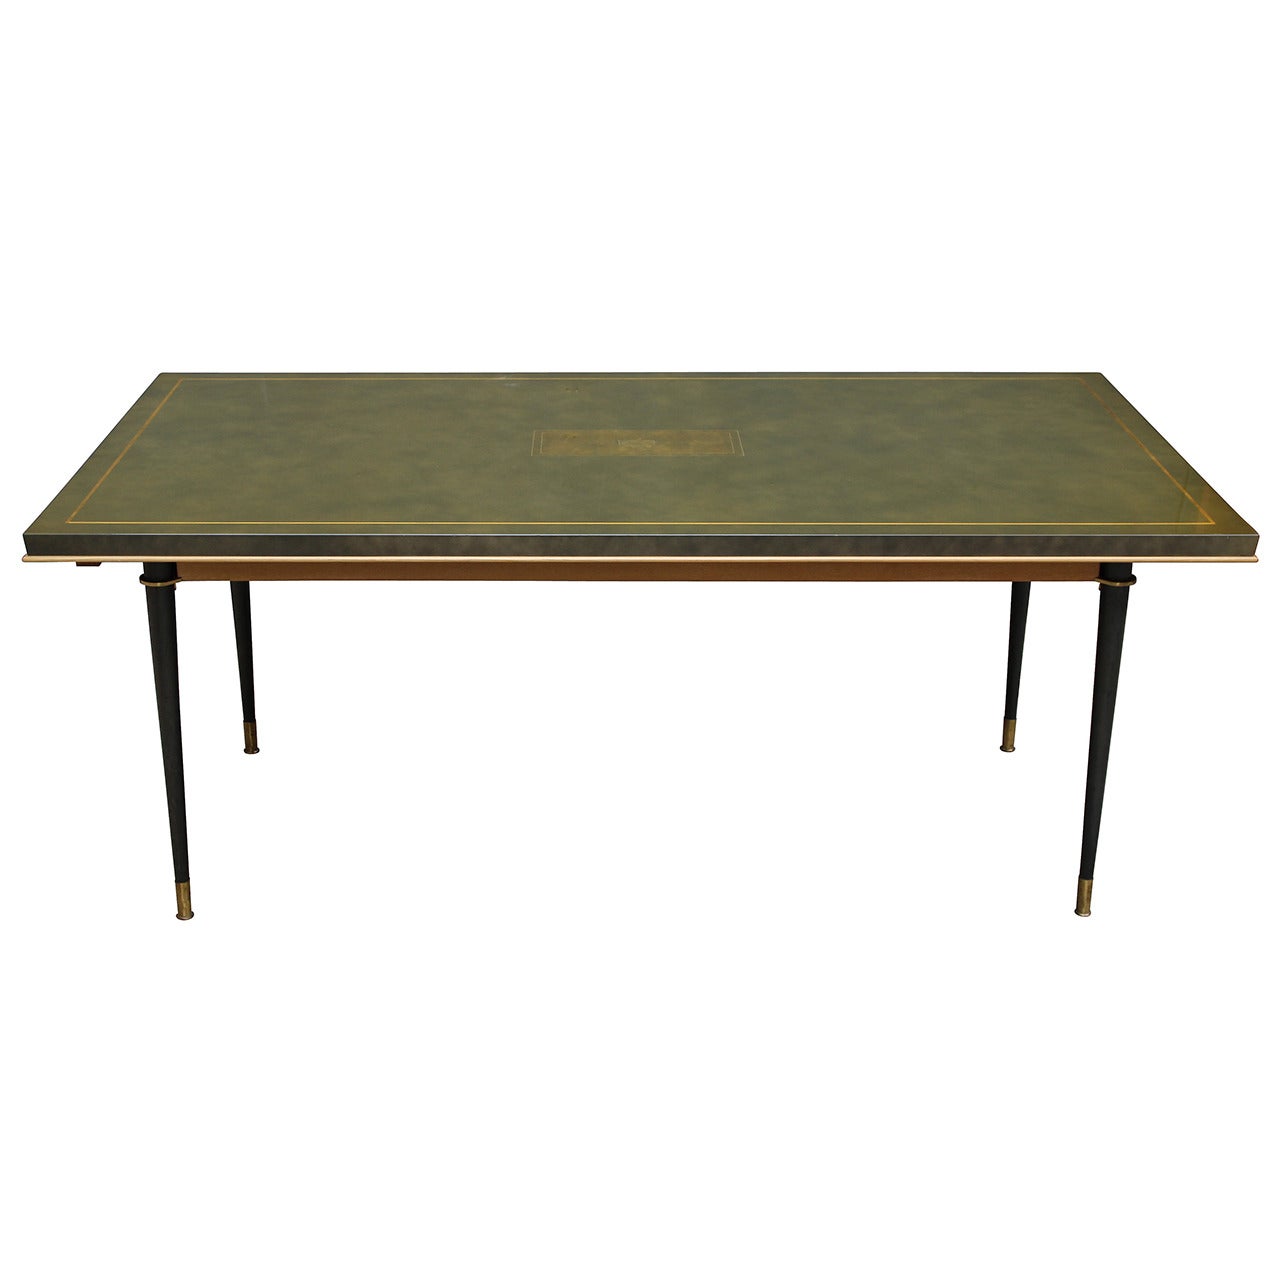 Baptistin Spade, Dining Room Table, Stamped, France, circa 1950